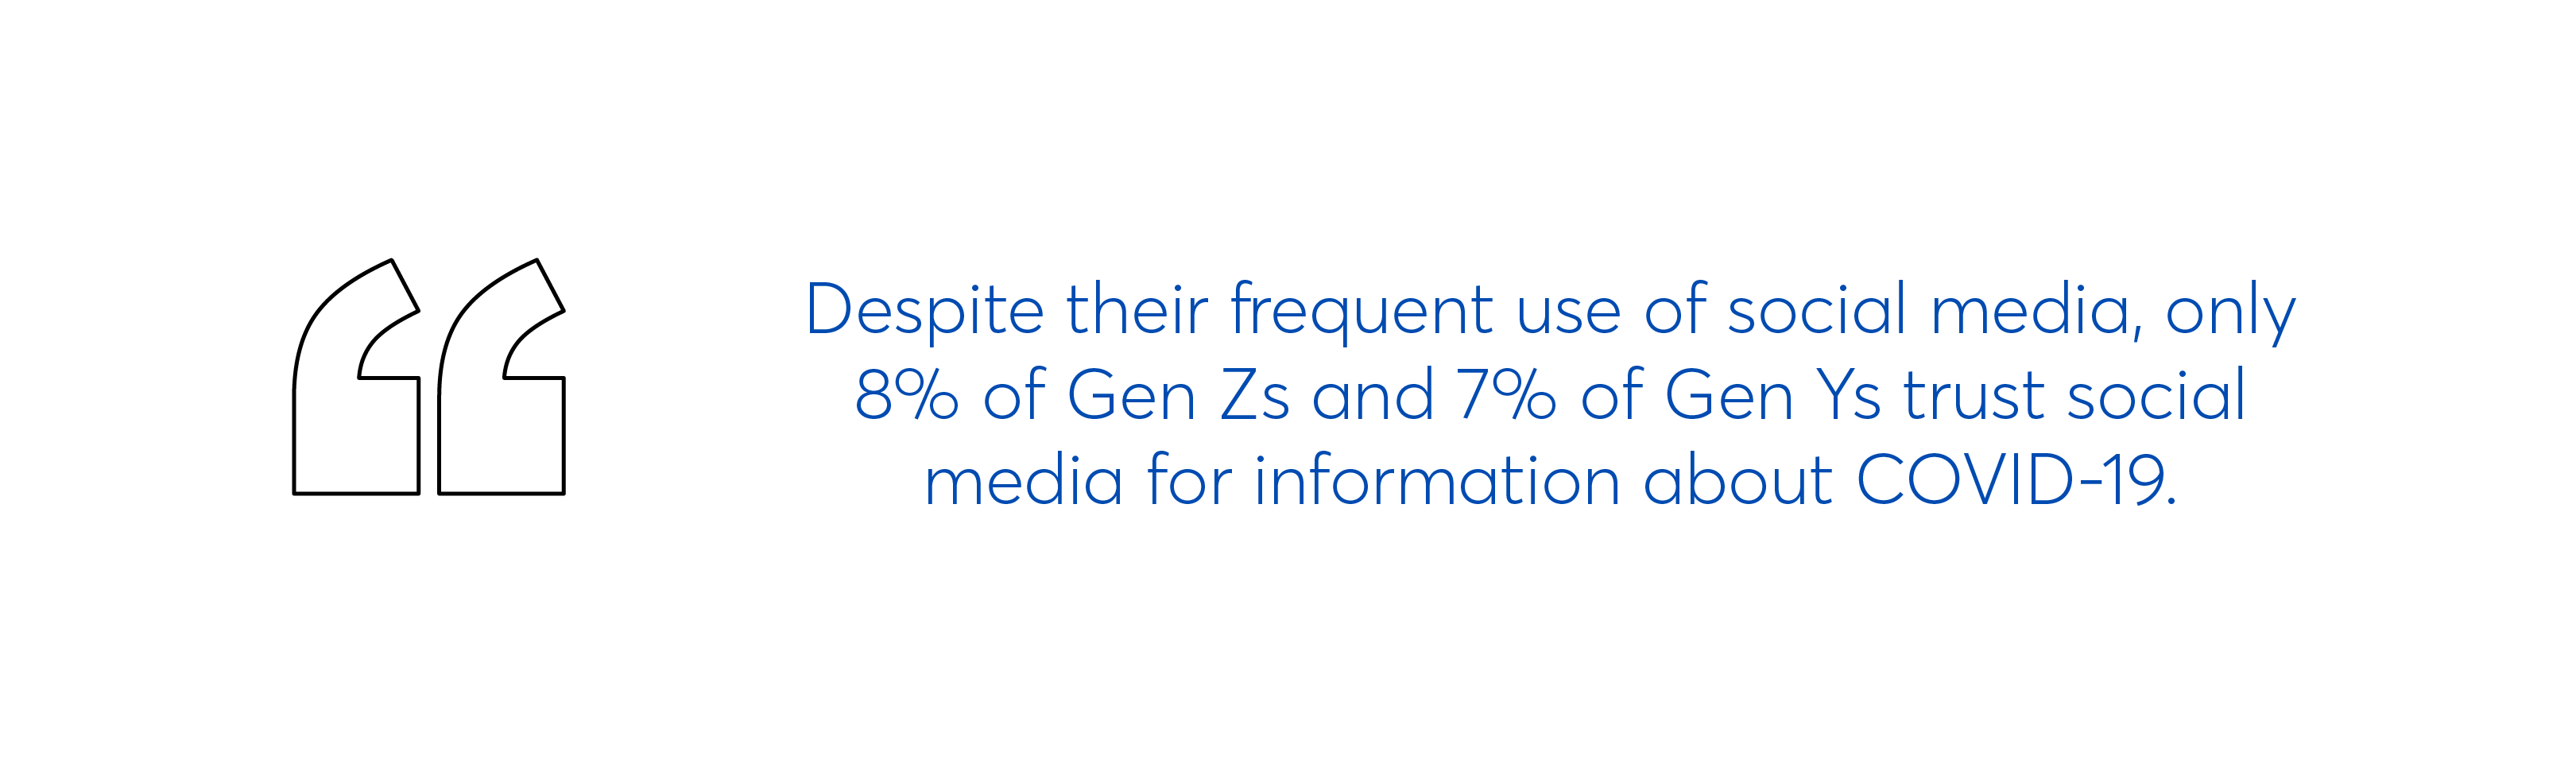 Despite frequent social media use, Gen Zs go to other souces 